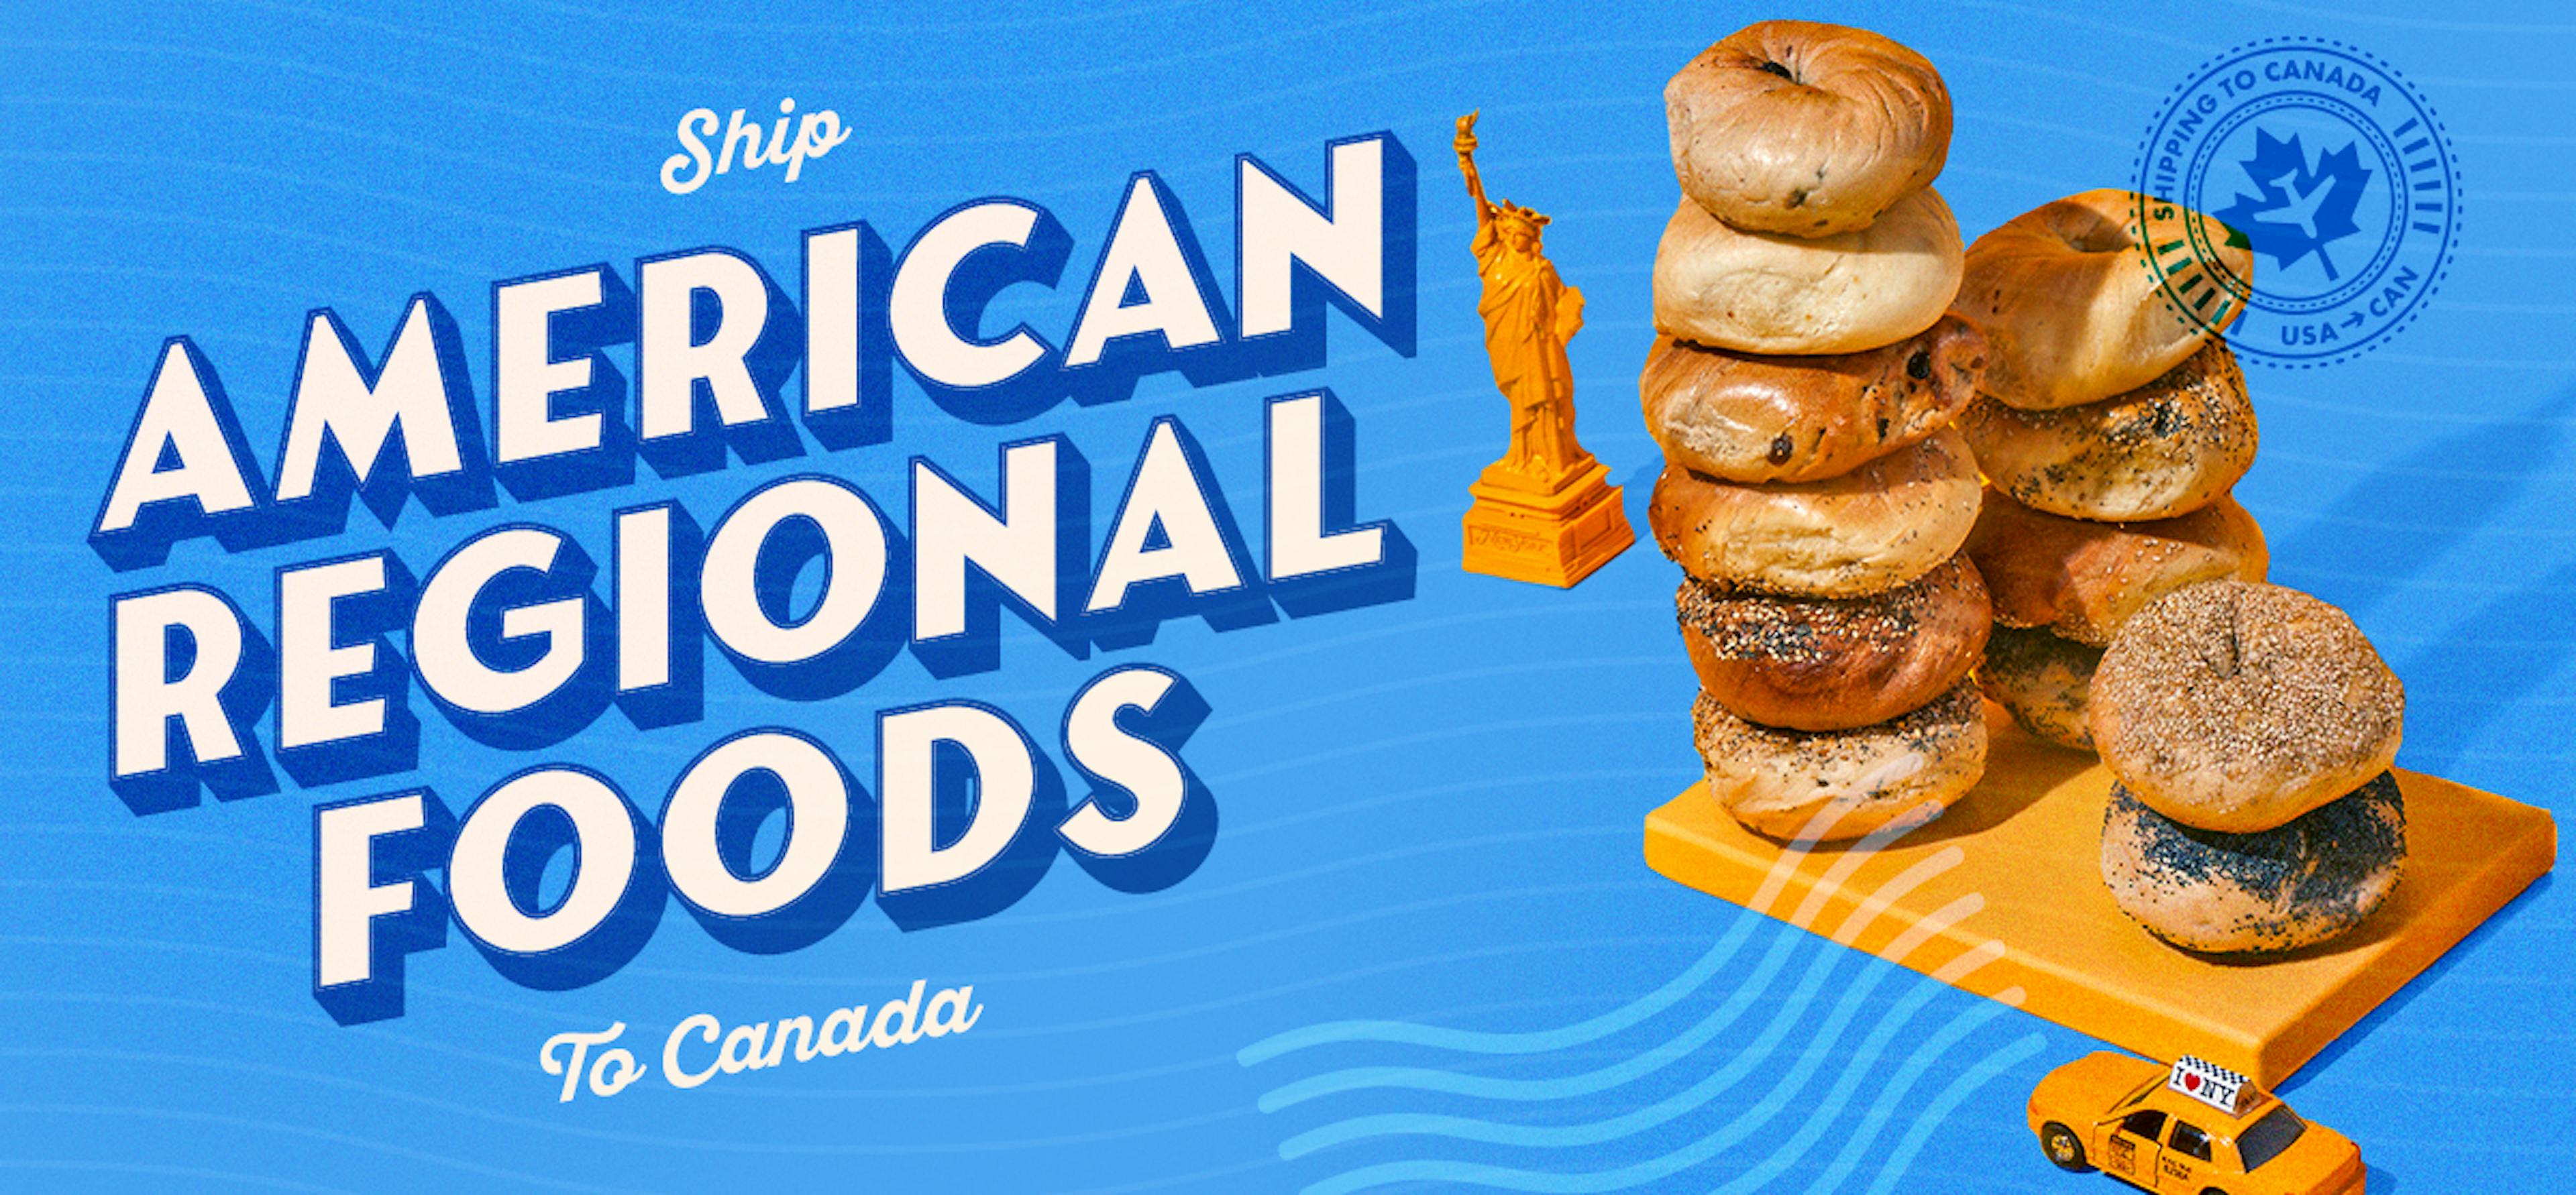 American Regional Foods that Ship to Canada